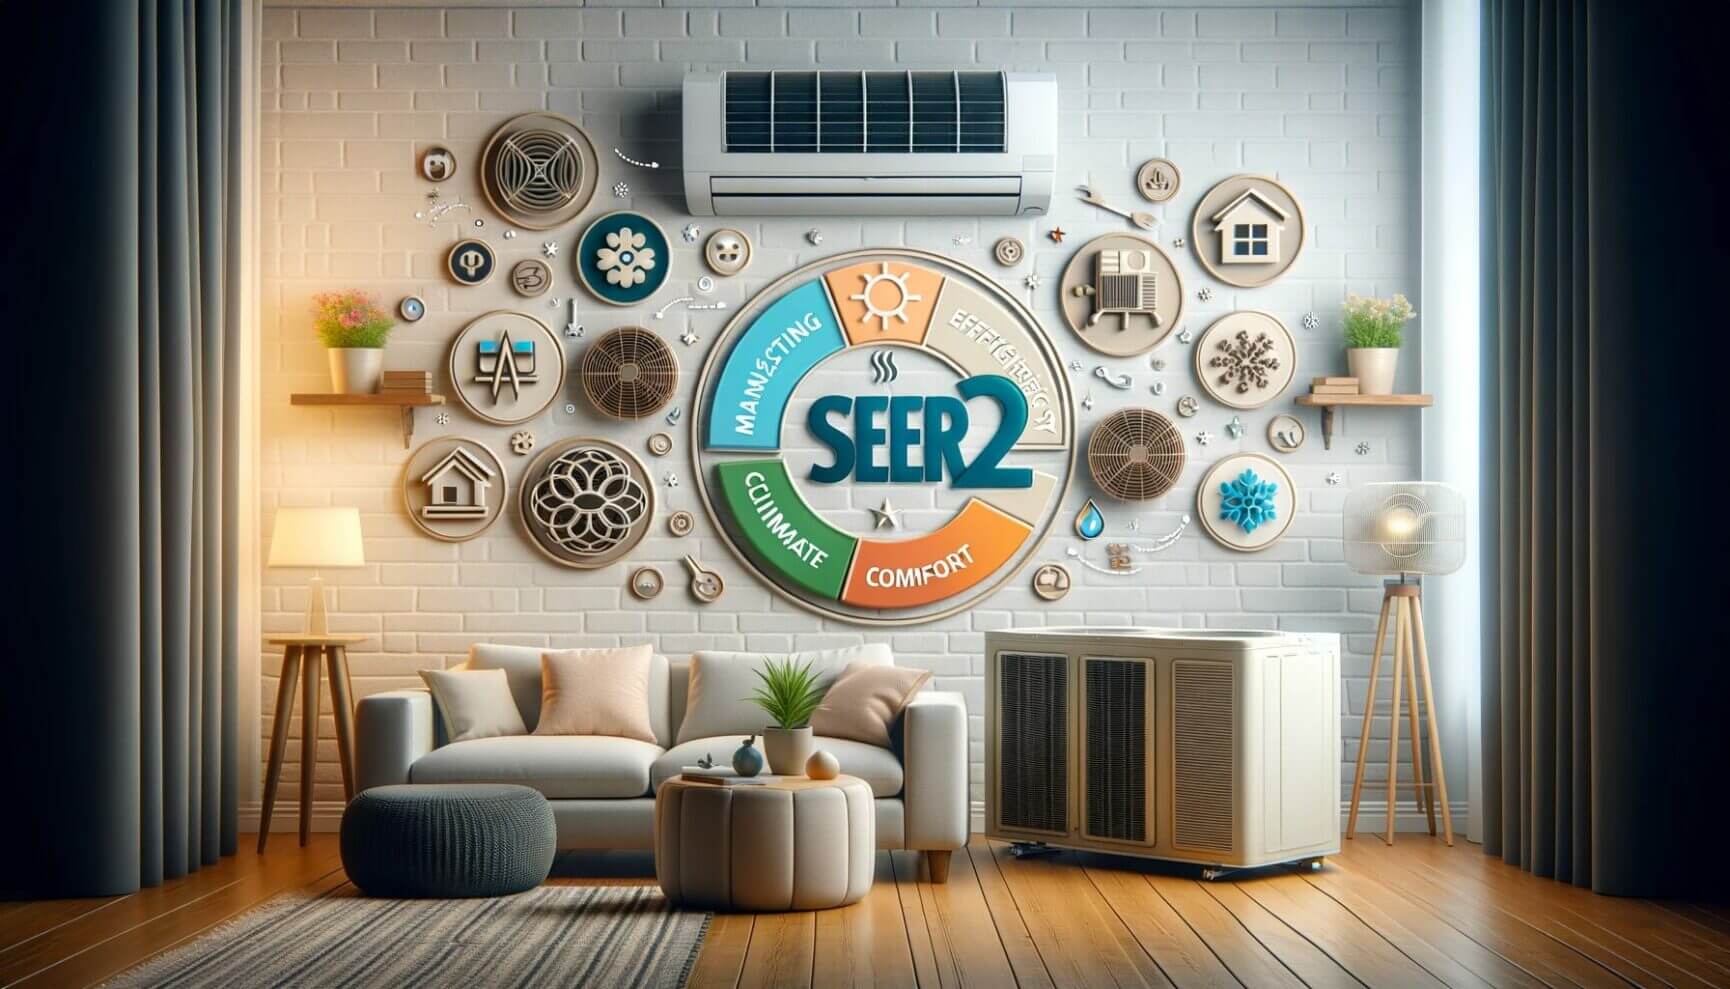 A living room with the words seo 2 on the wall.